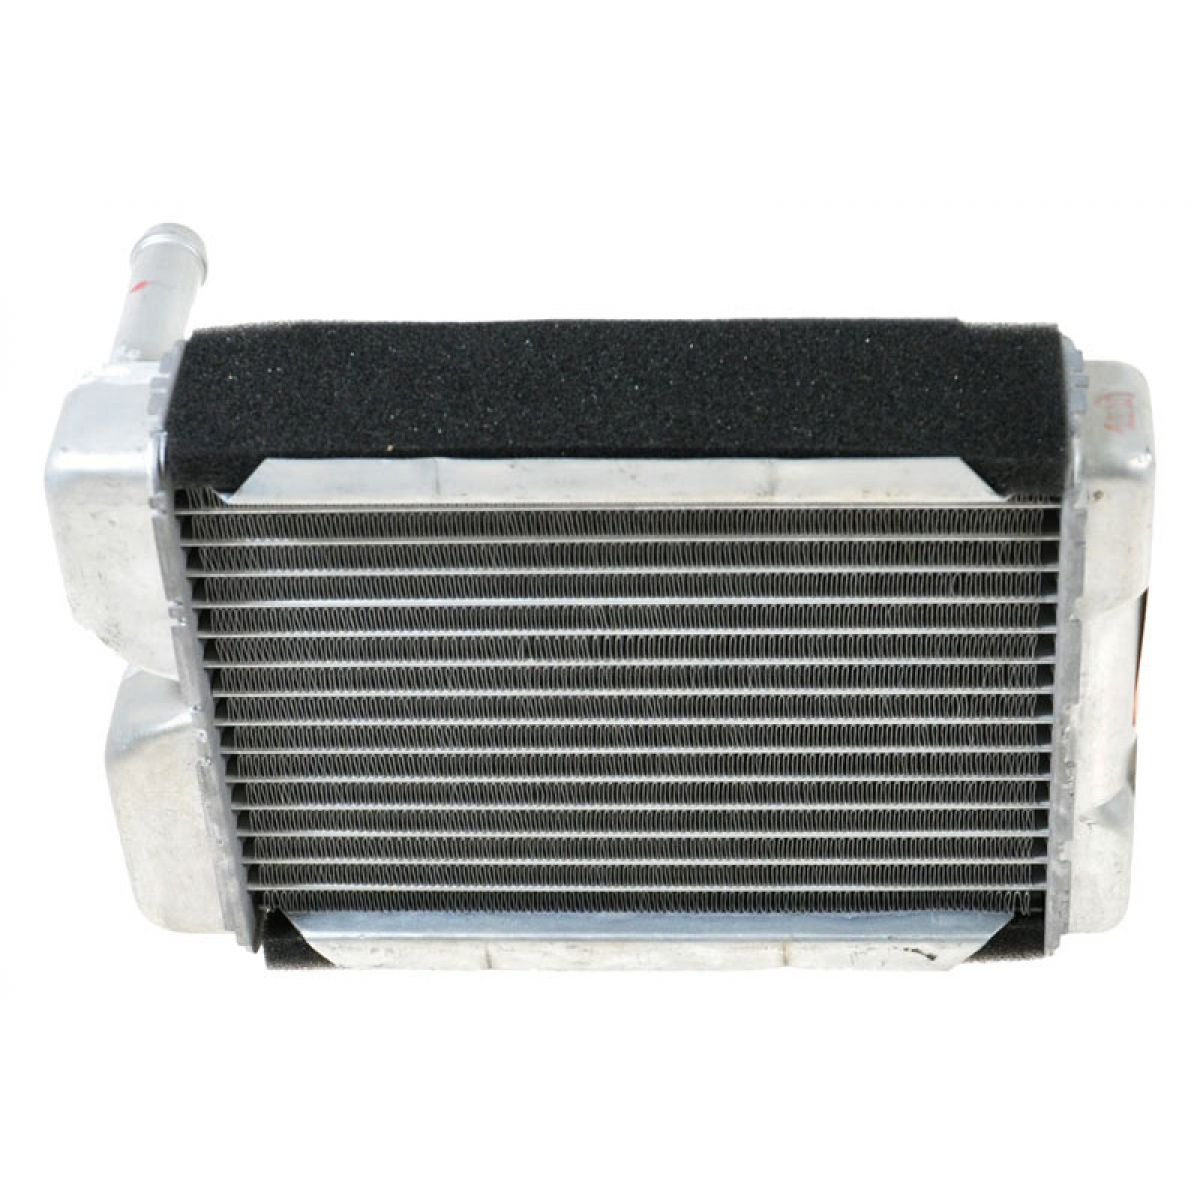 Change heater core 1978 ford bronco #2